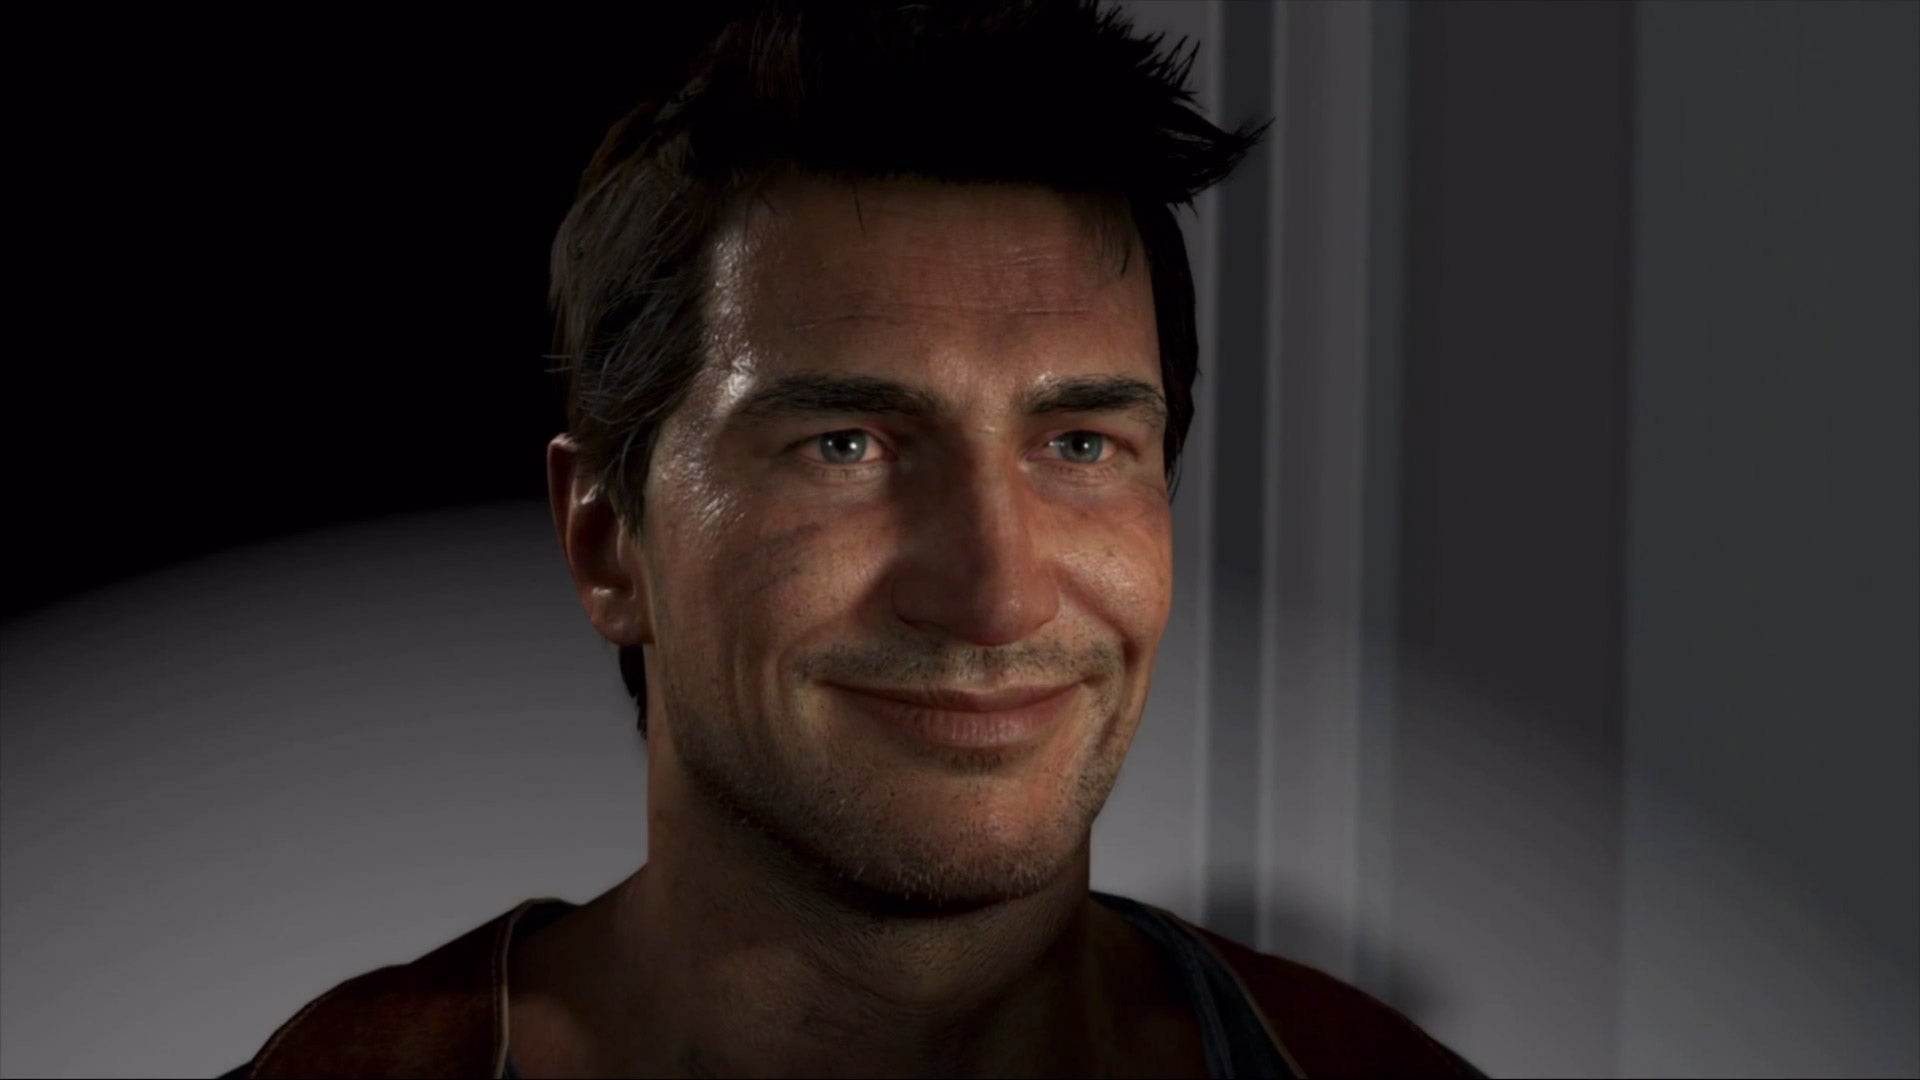 Image for Looks like Uncharted 4 will be Sony's next big PC game